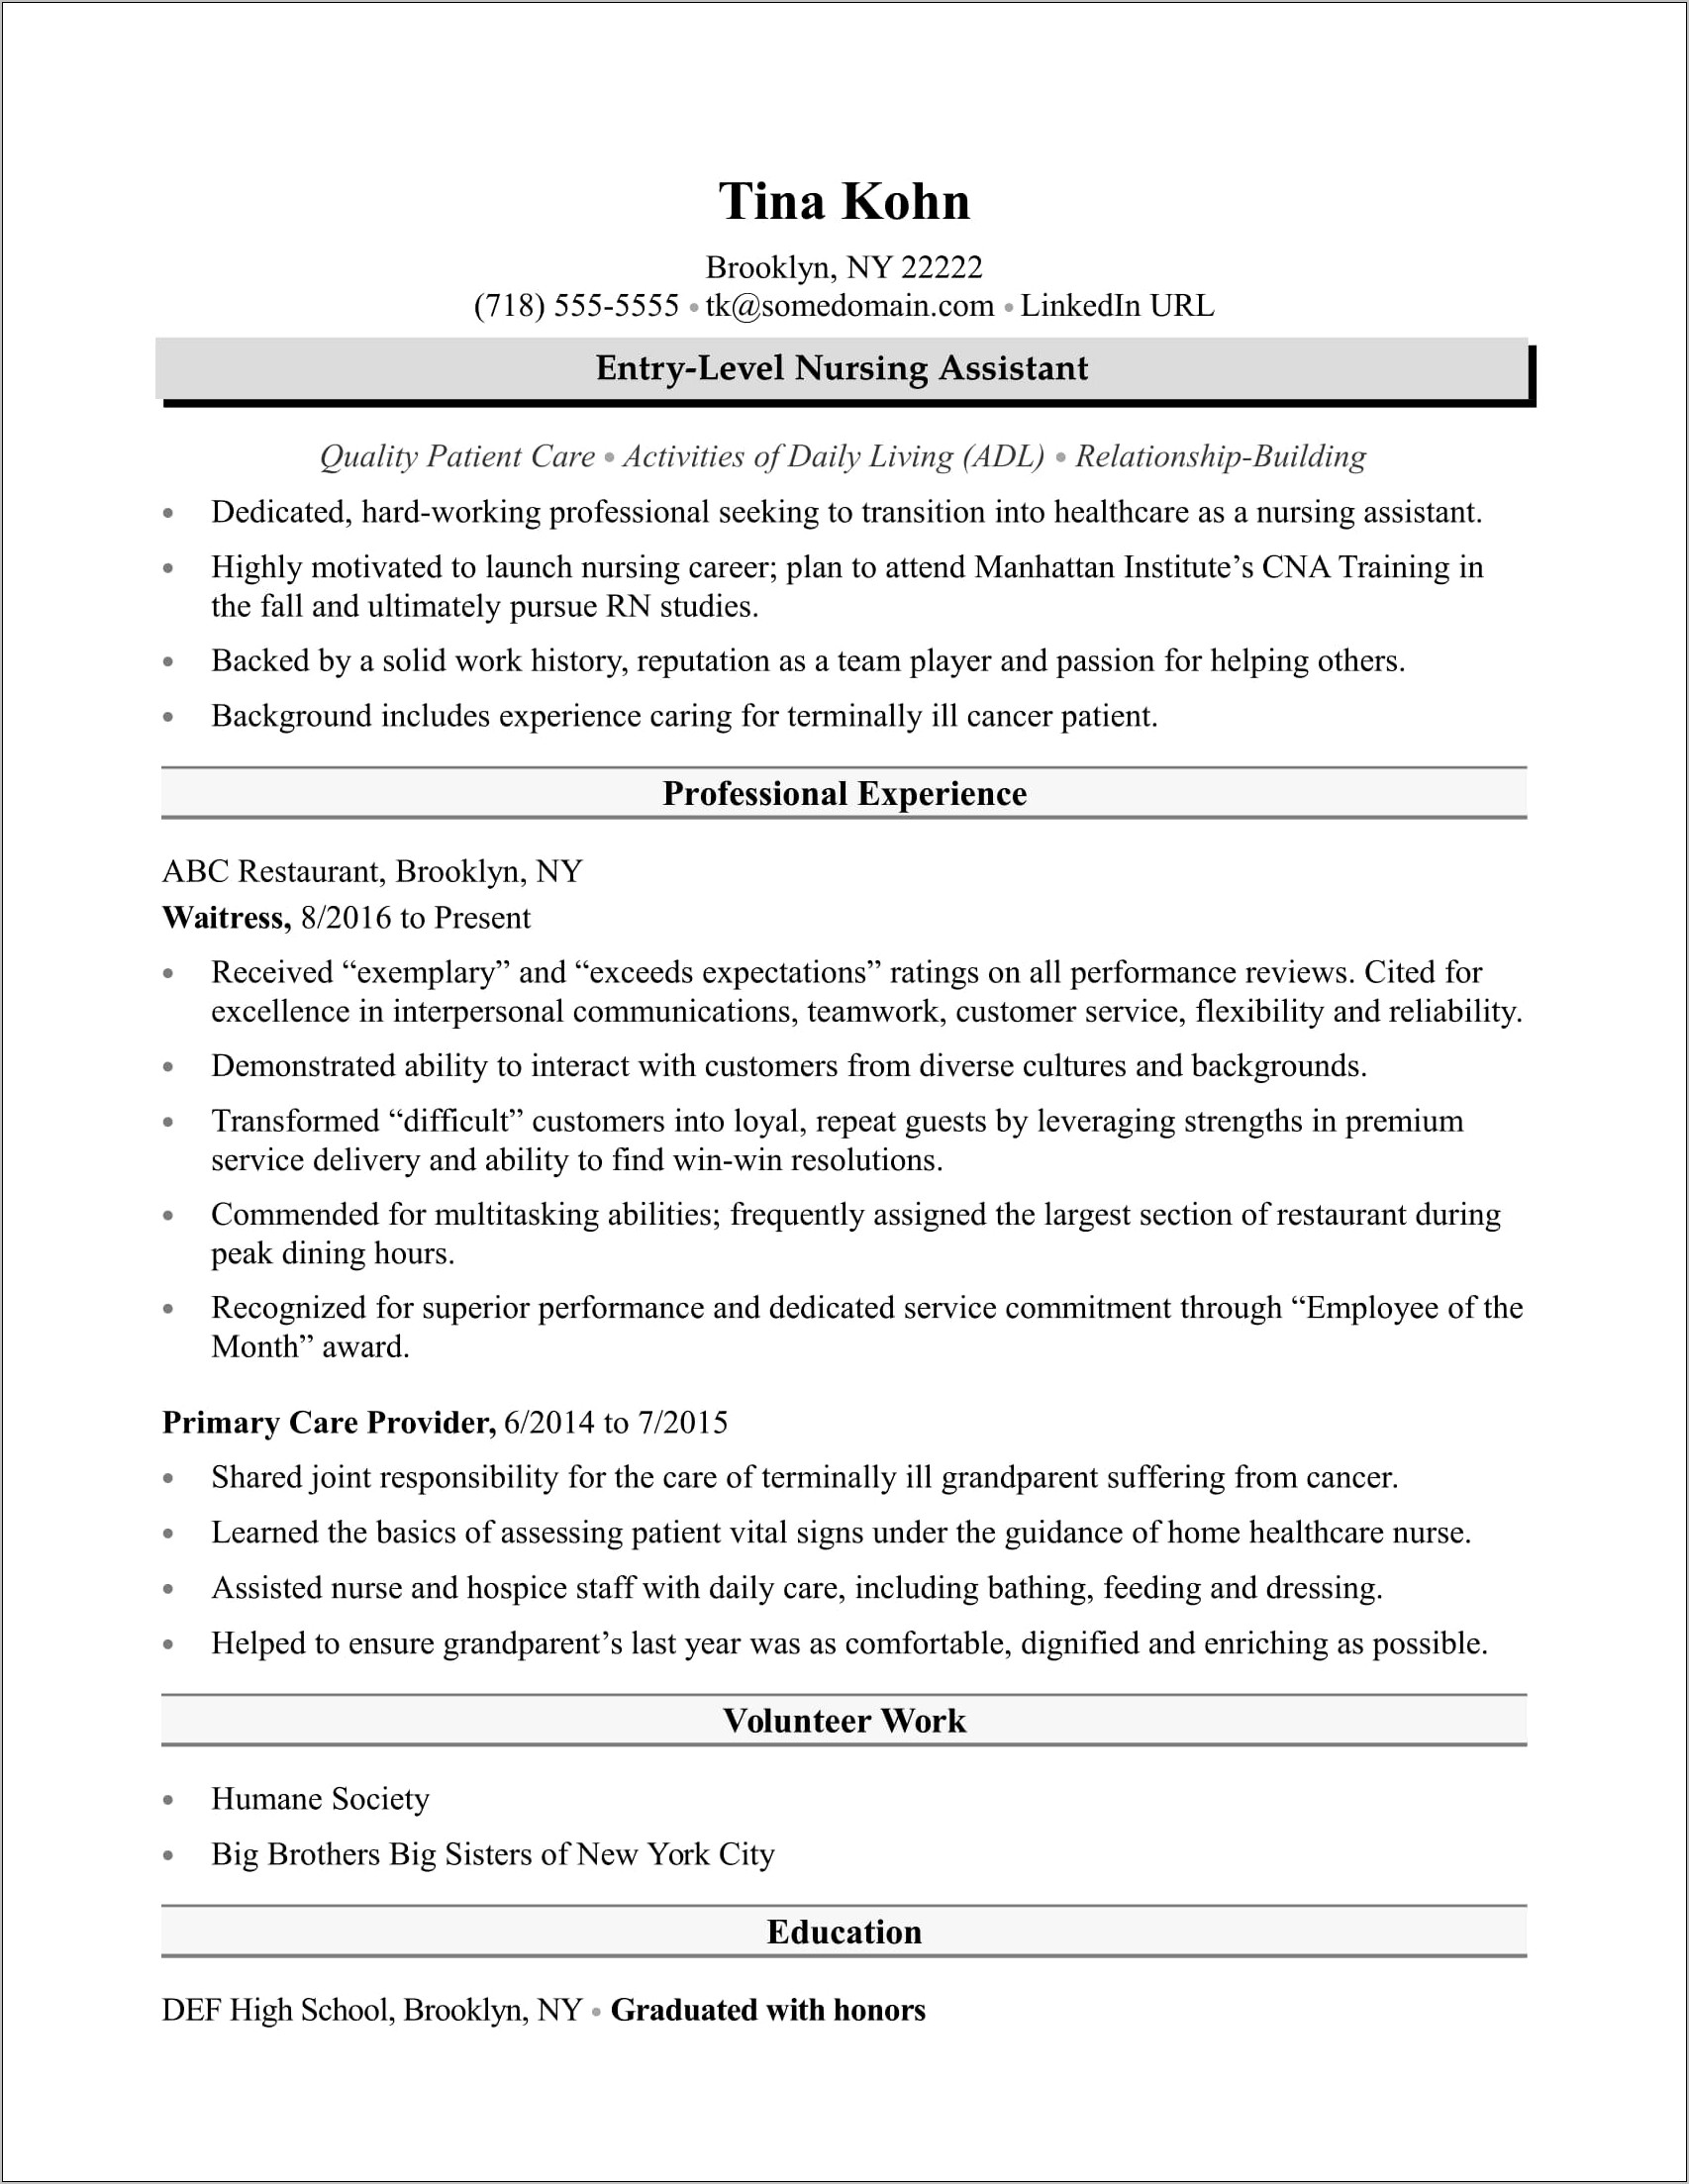 Resume With Very Little Work Experience